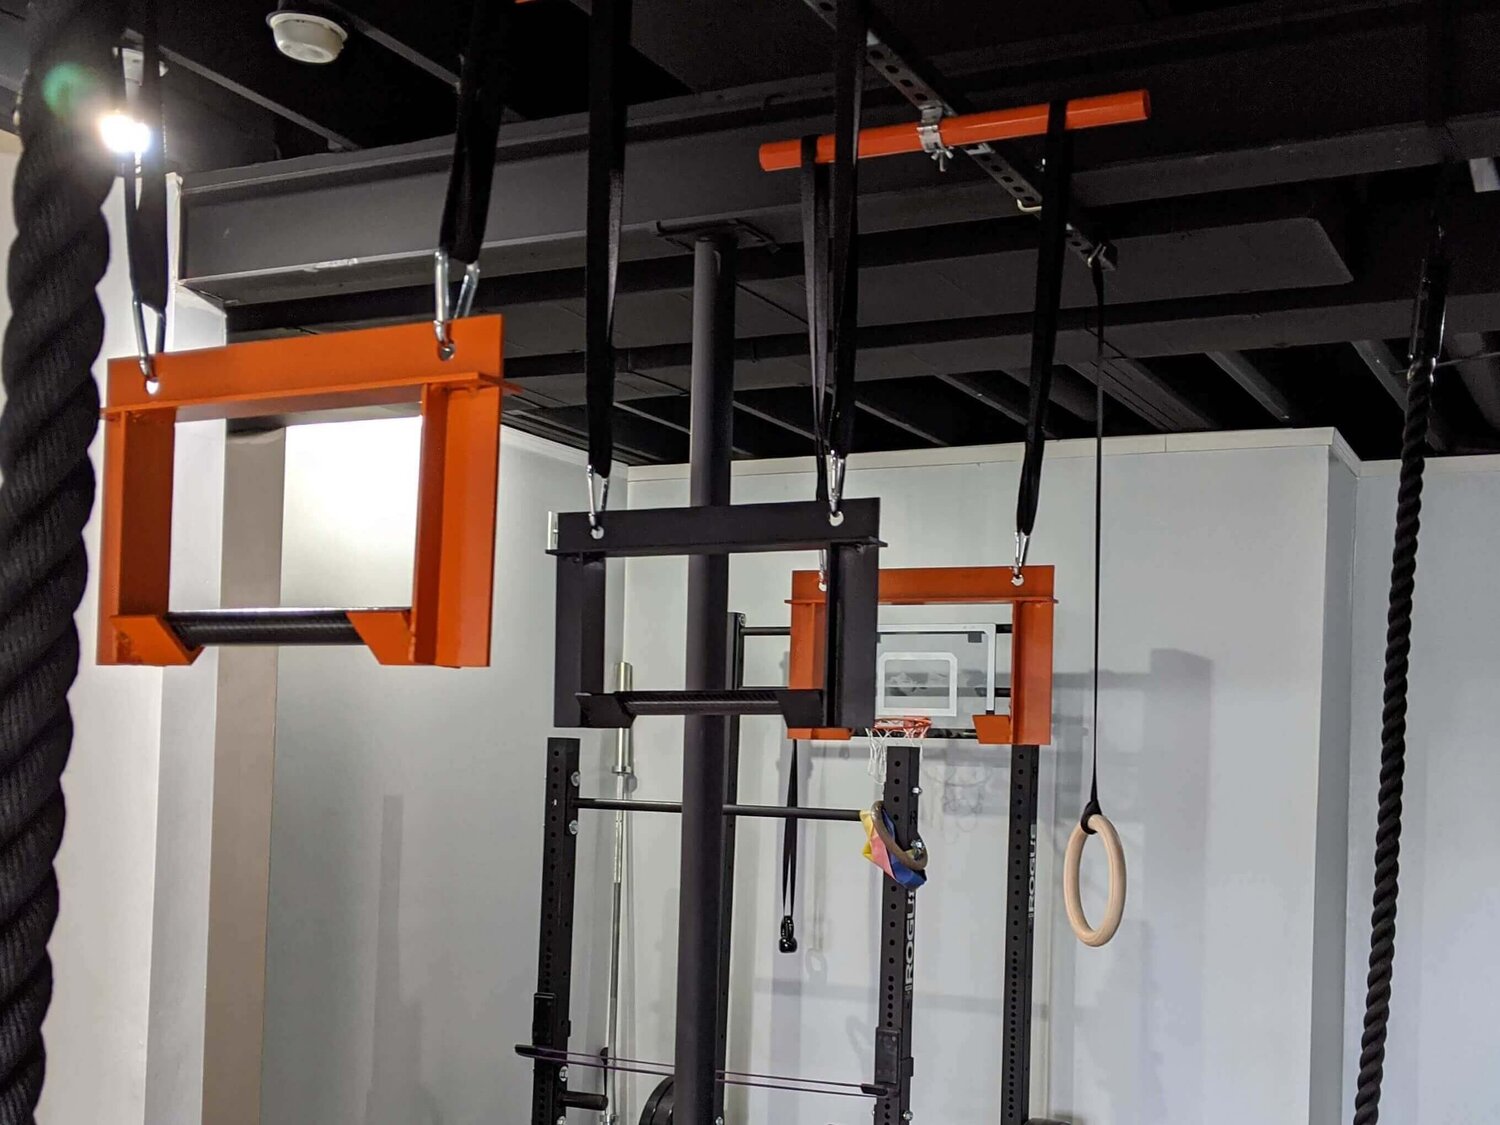 How to Master the Monkey Bar Obstacle Like a Champ